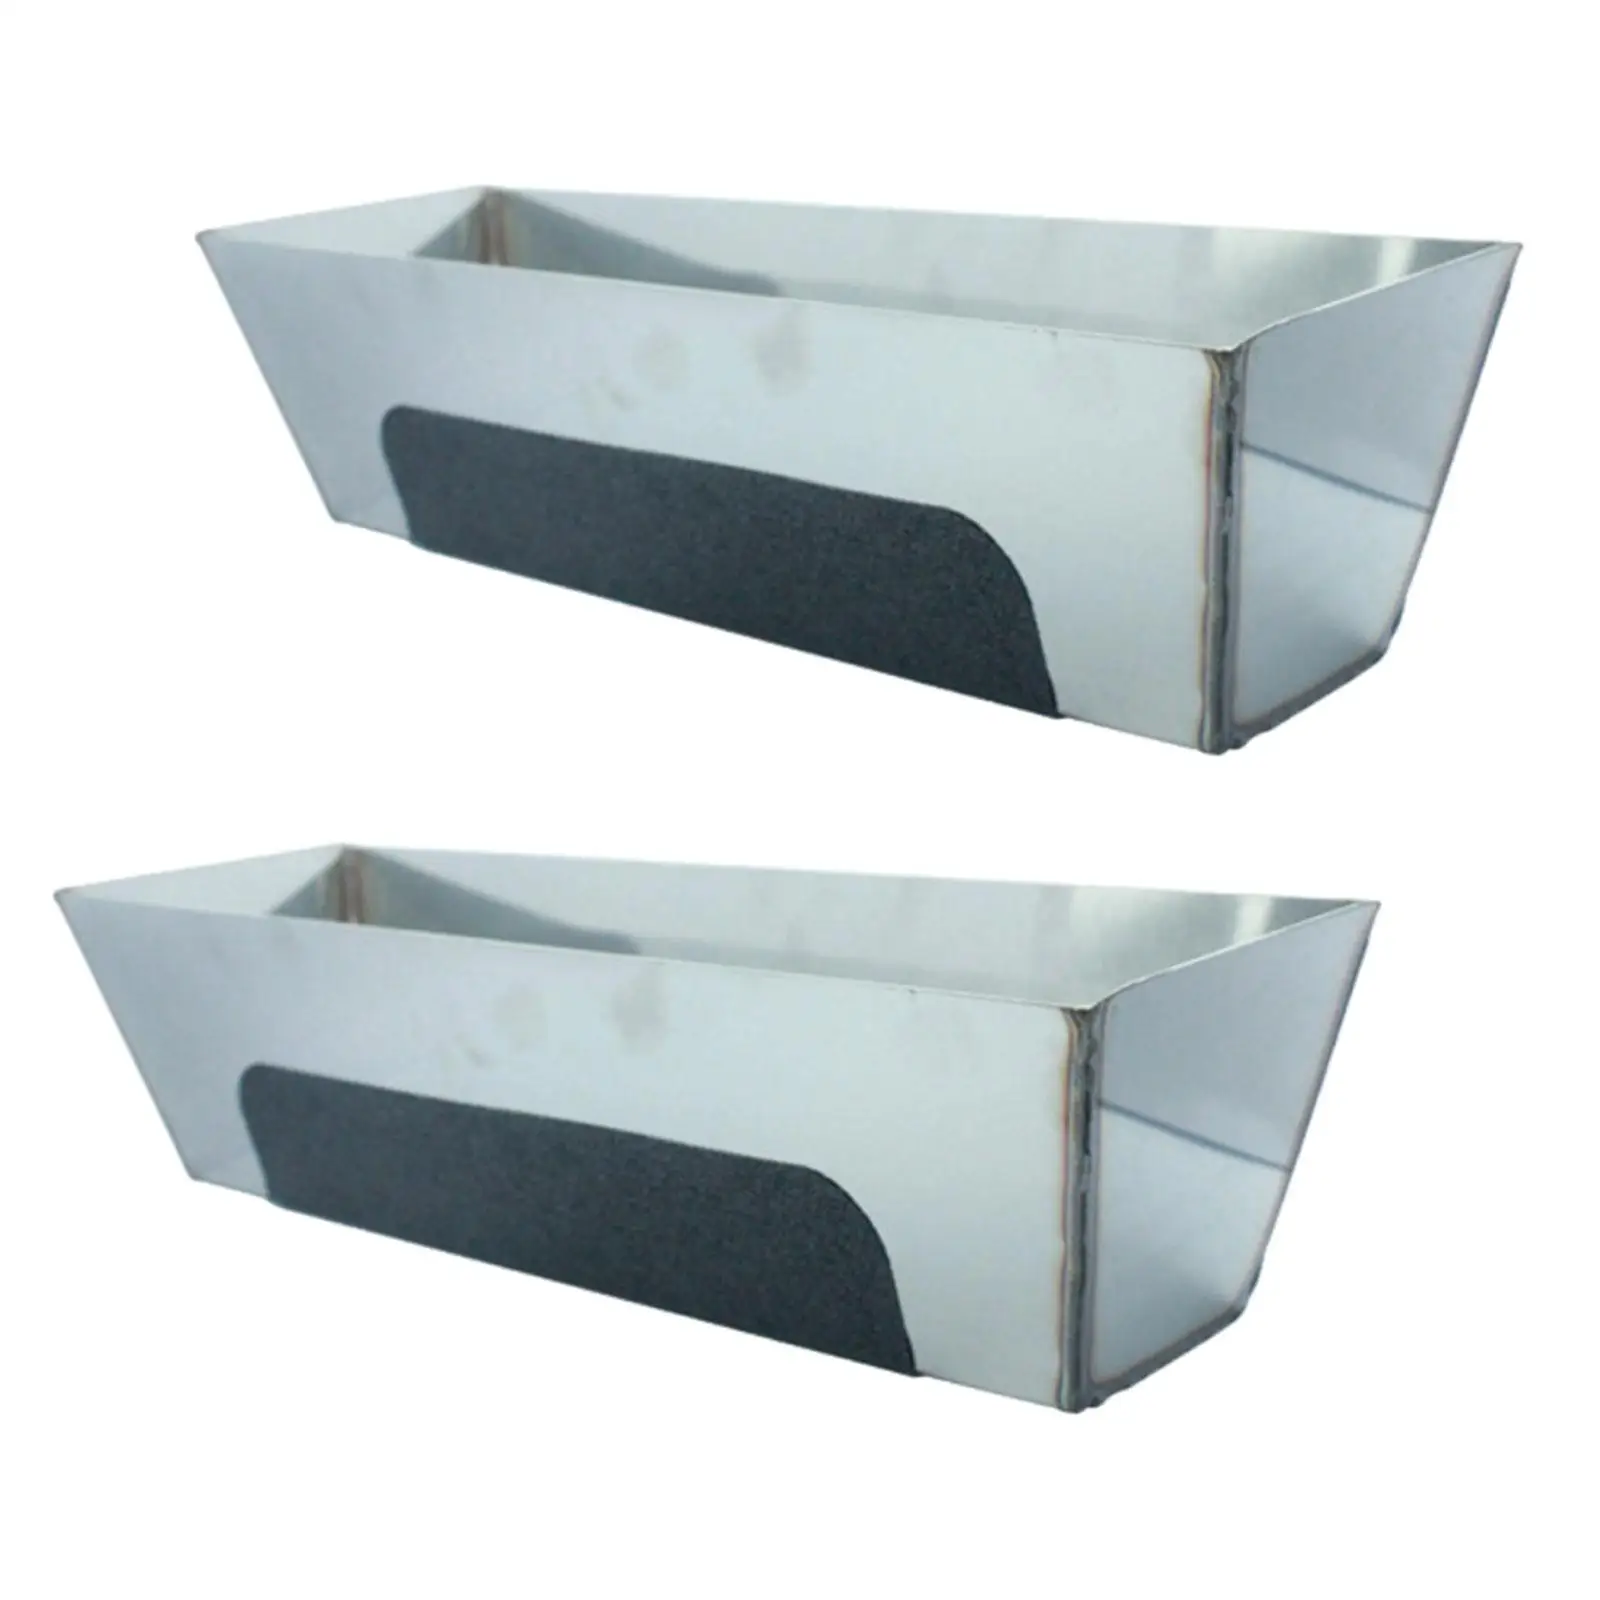 Stainless Steel Mud Pan Mud Pan Fittings Drywall Sheared Edges Anti Slip Trays Plastering Plasterers for Easy Knife Cleaning